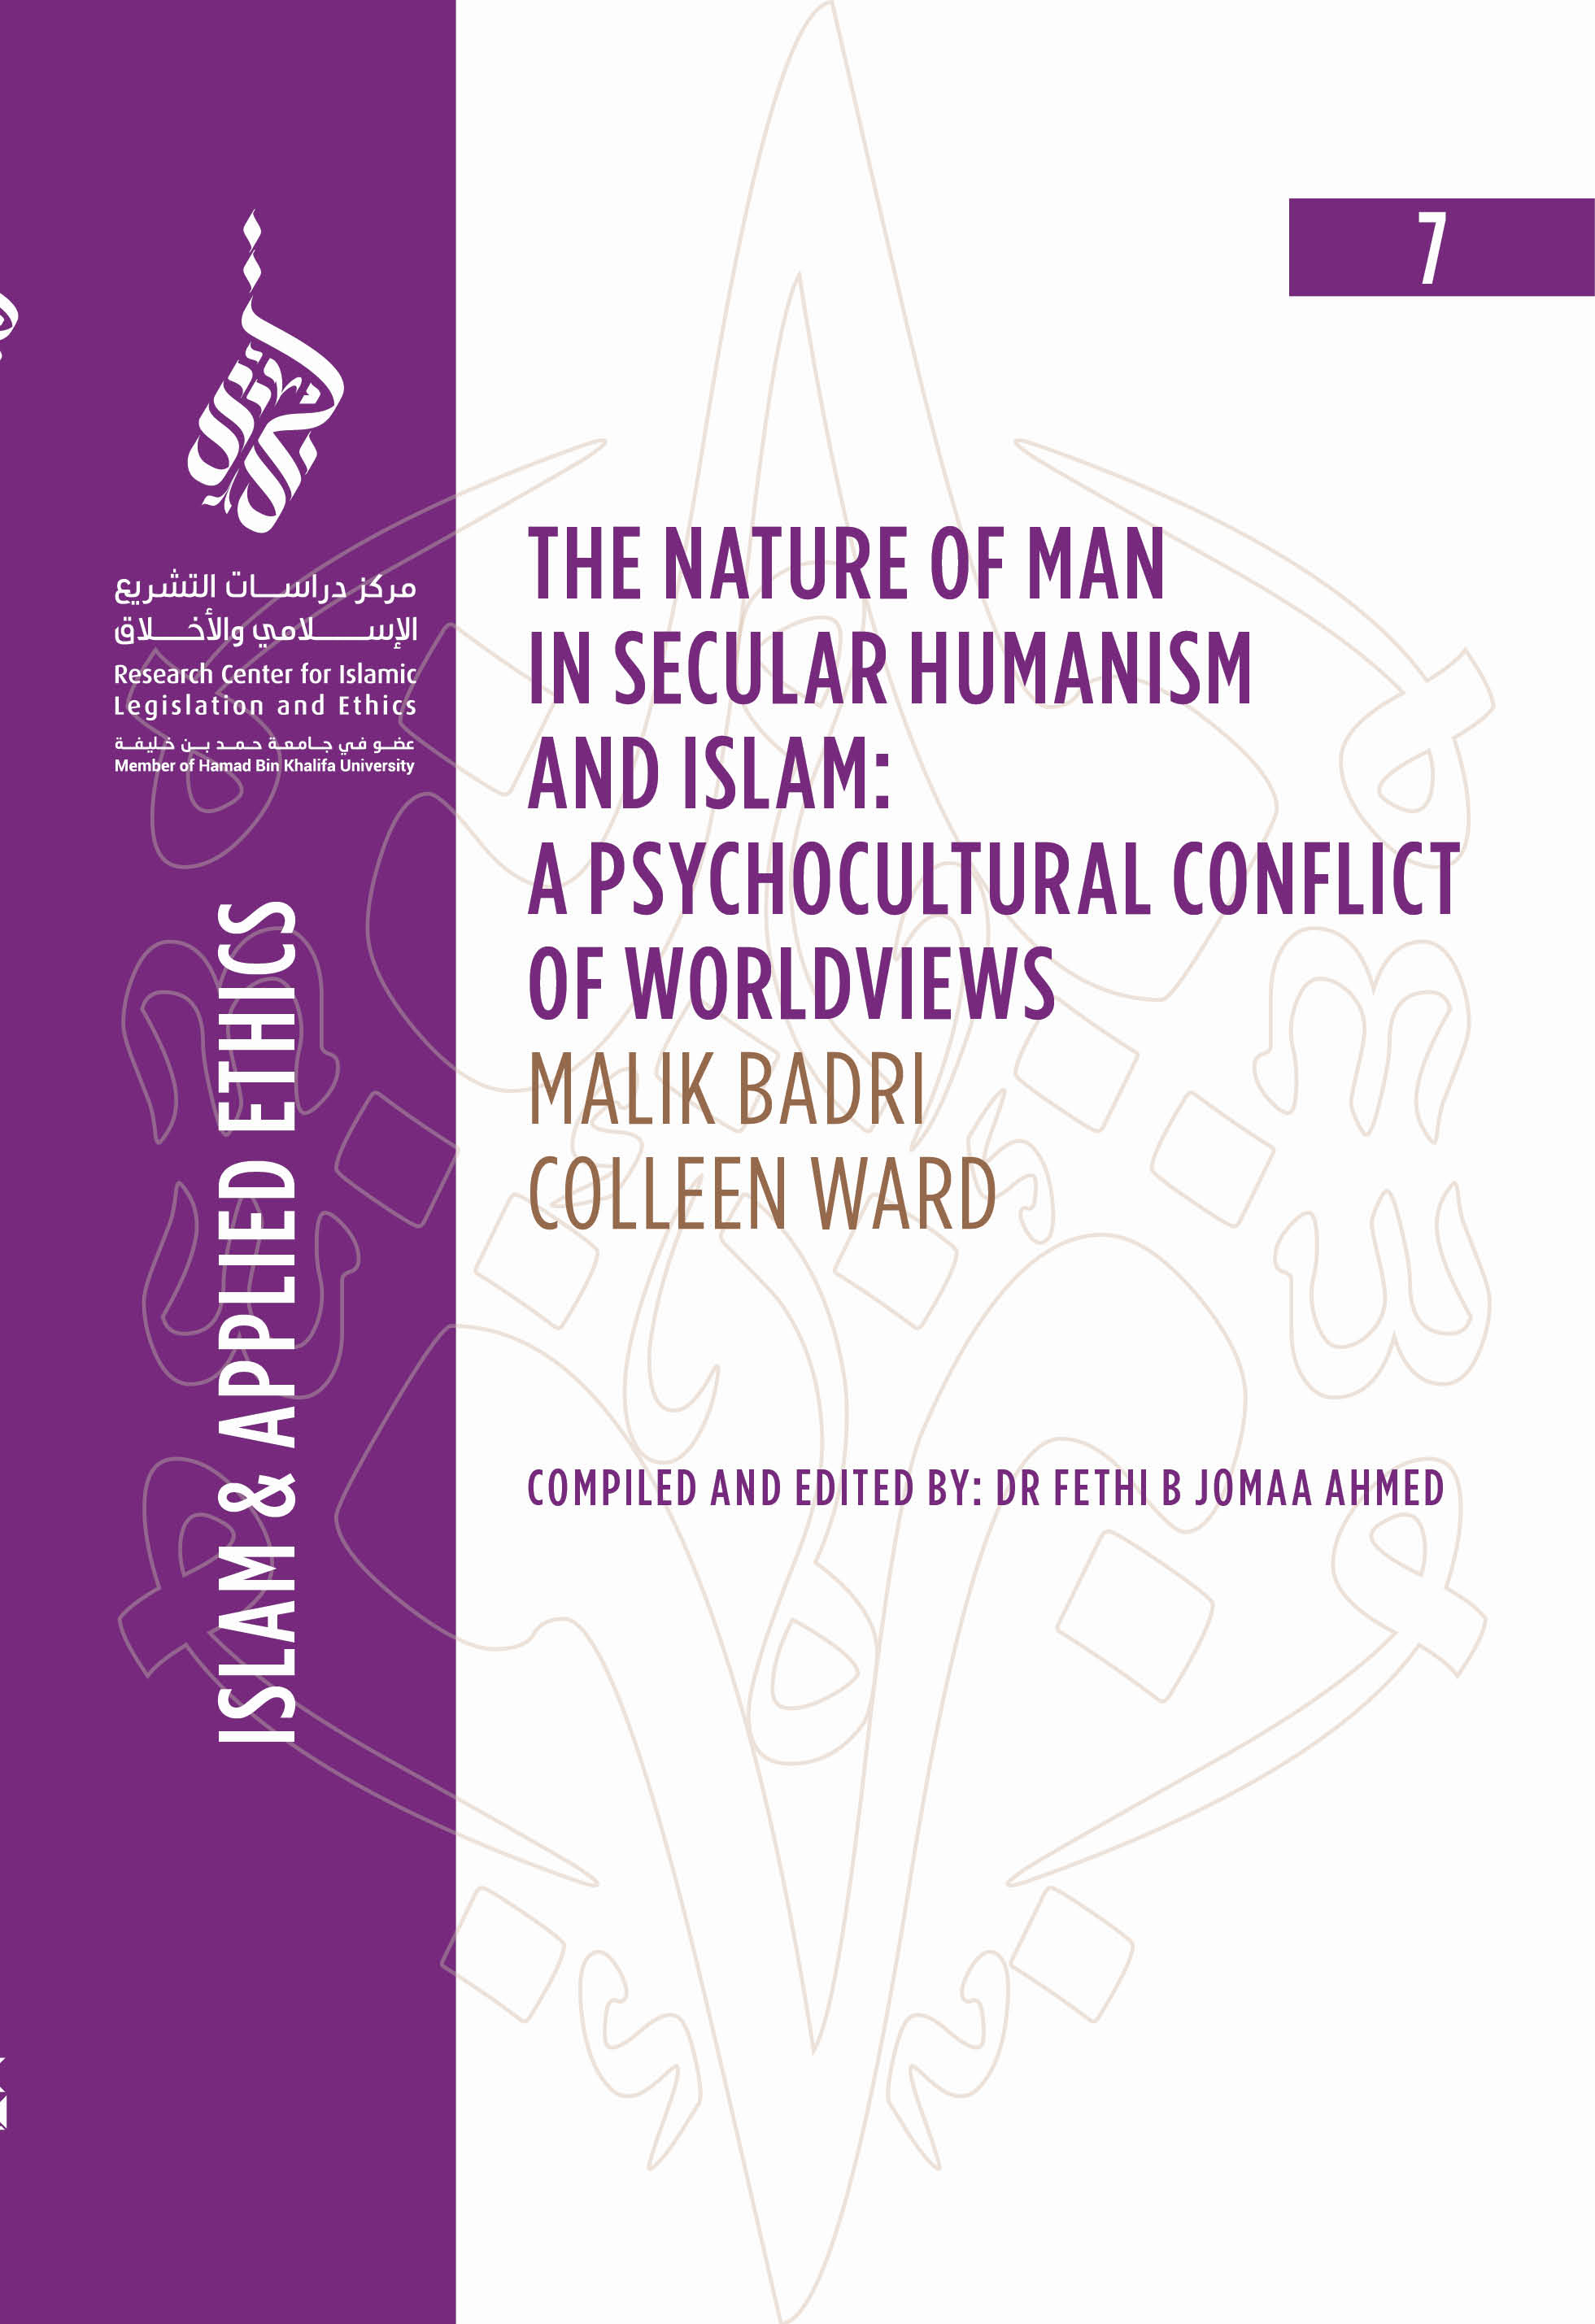 image of The Nature of Man in Secular Humanism and Islam: A Psychospiritual Conflict of Worldviews